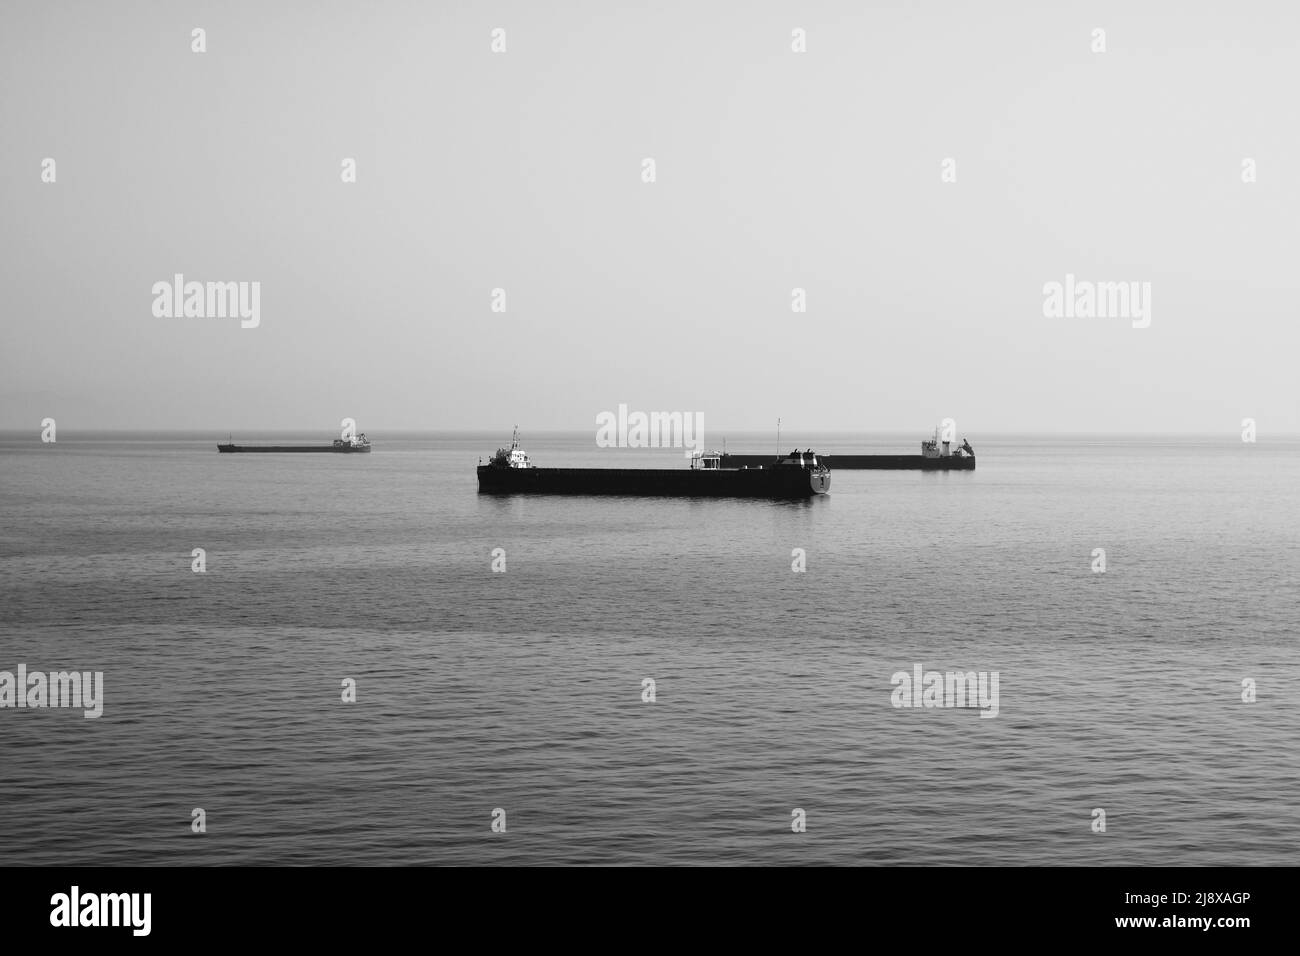 A black and white photo of the cargo ships Stock Photo